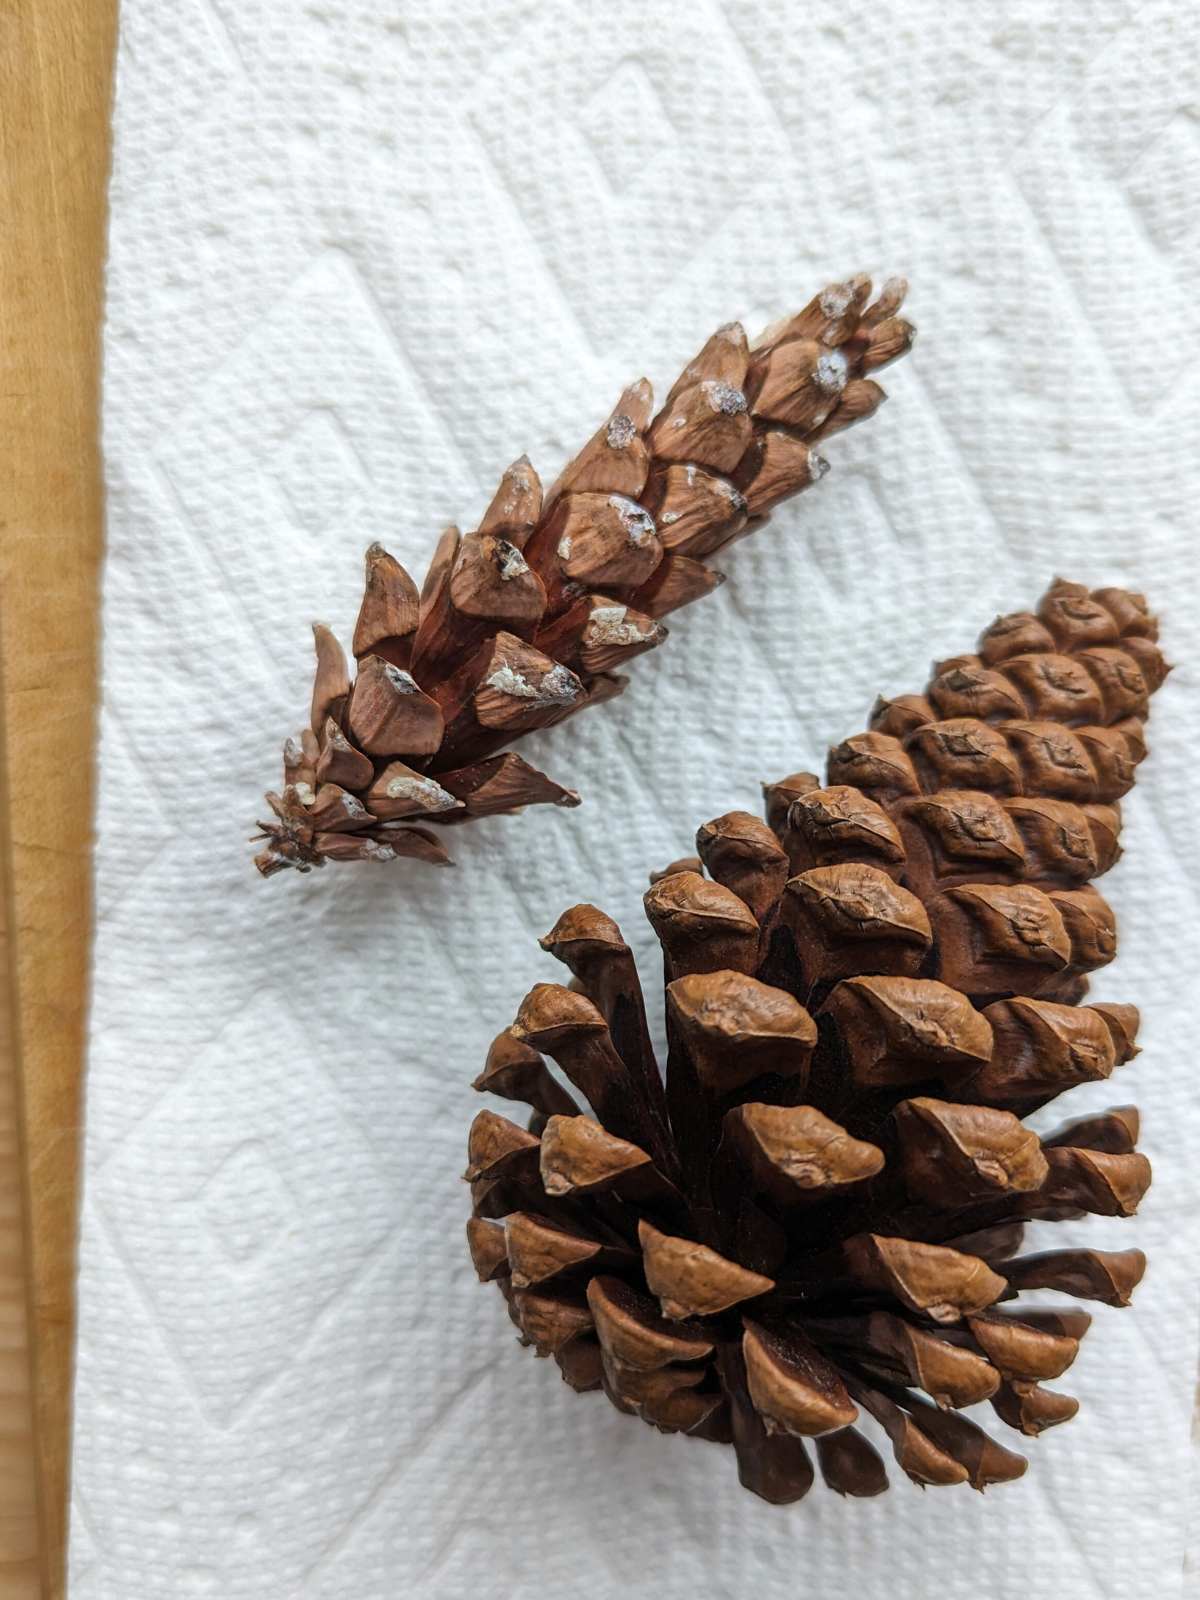 Two pinecones with closed tops and open bottoms on a paper towel. Bottom pinecone is large and top pinecone is smaller.